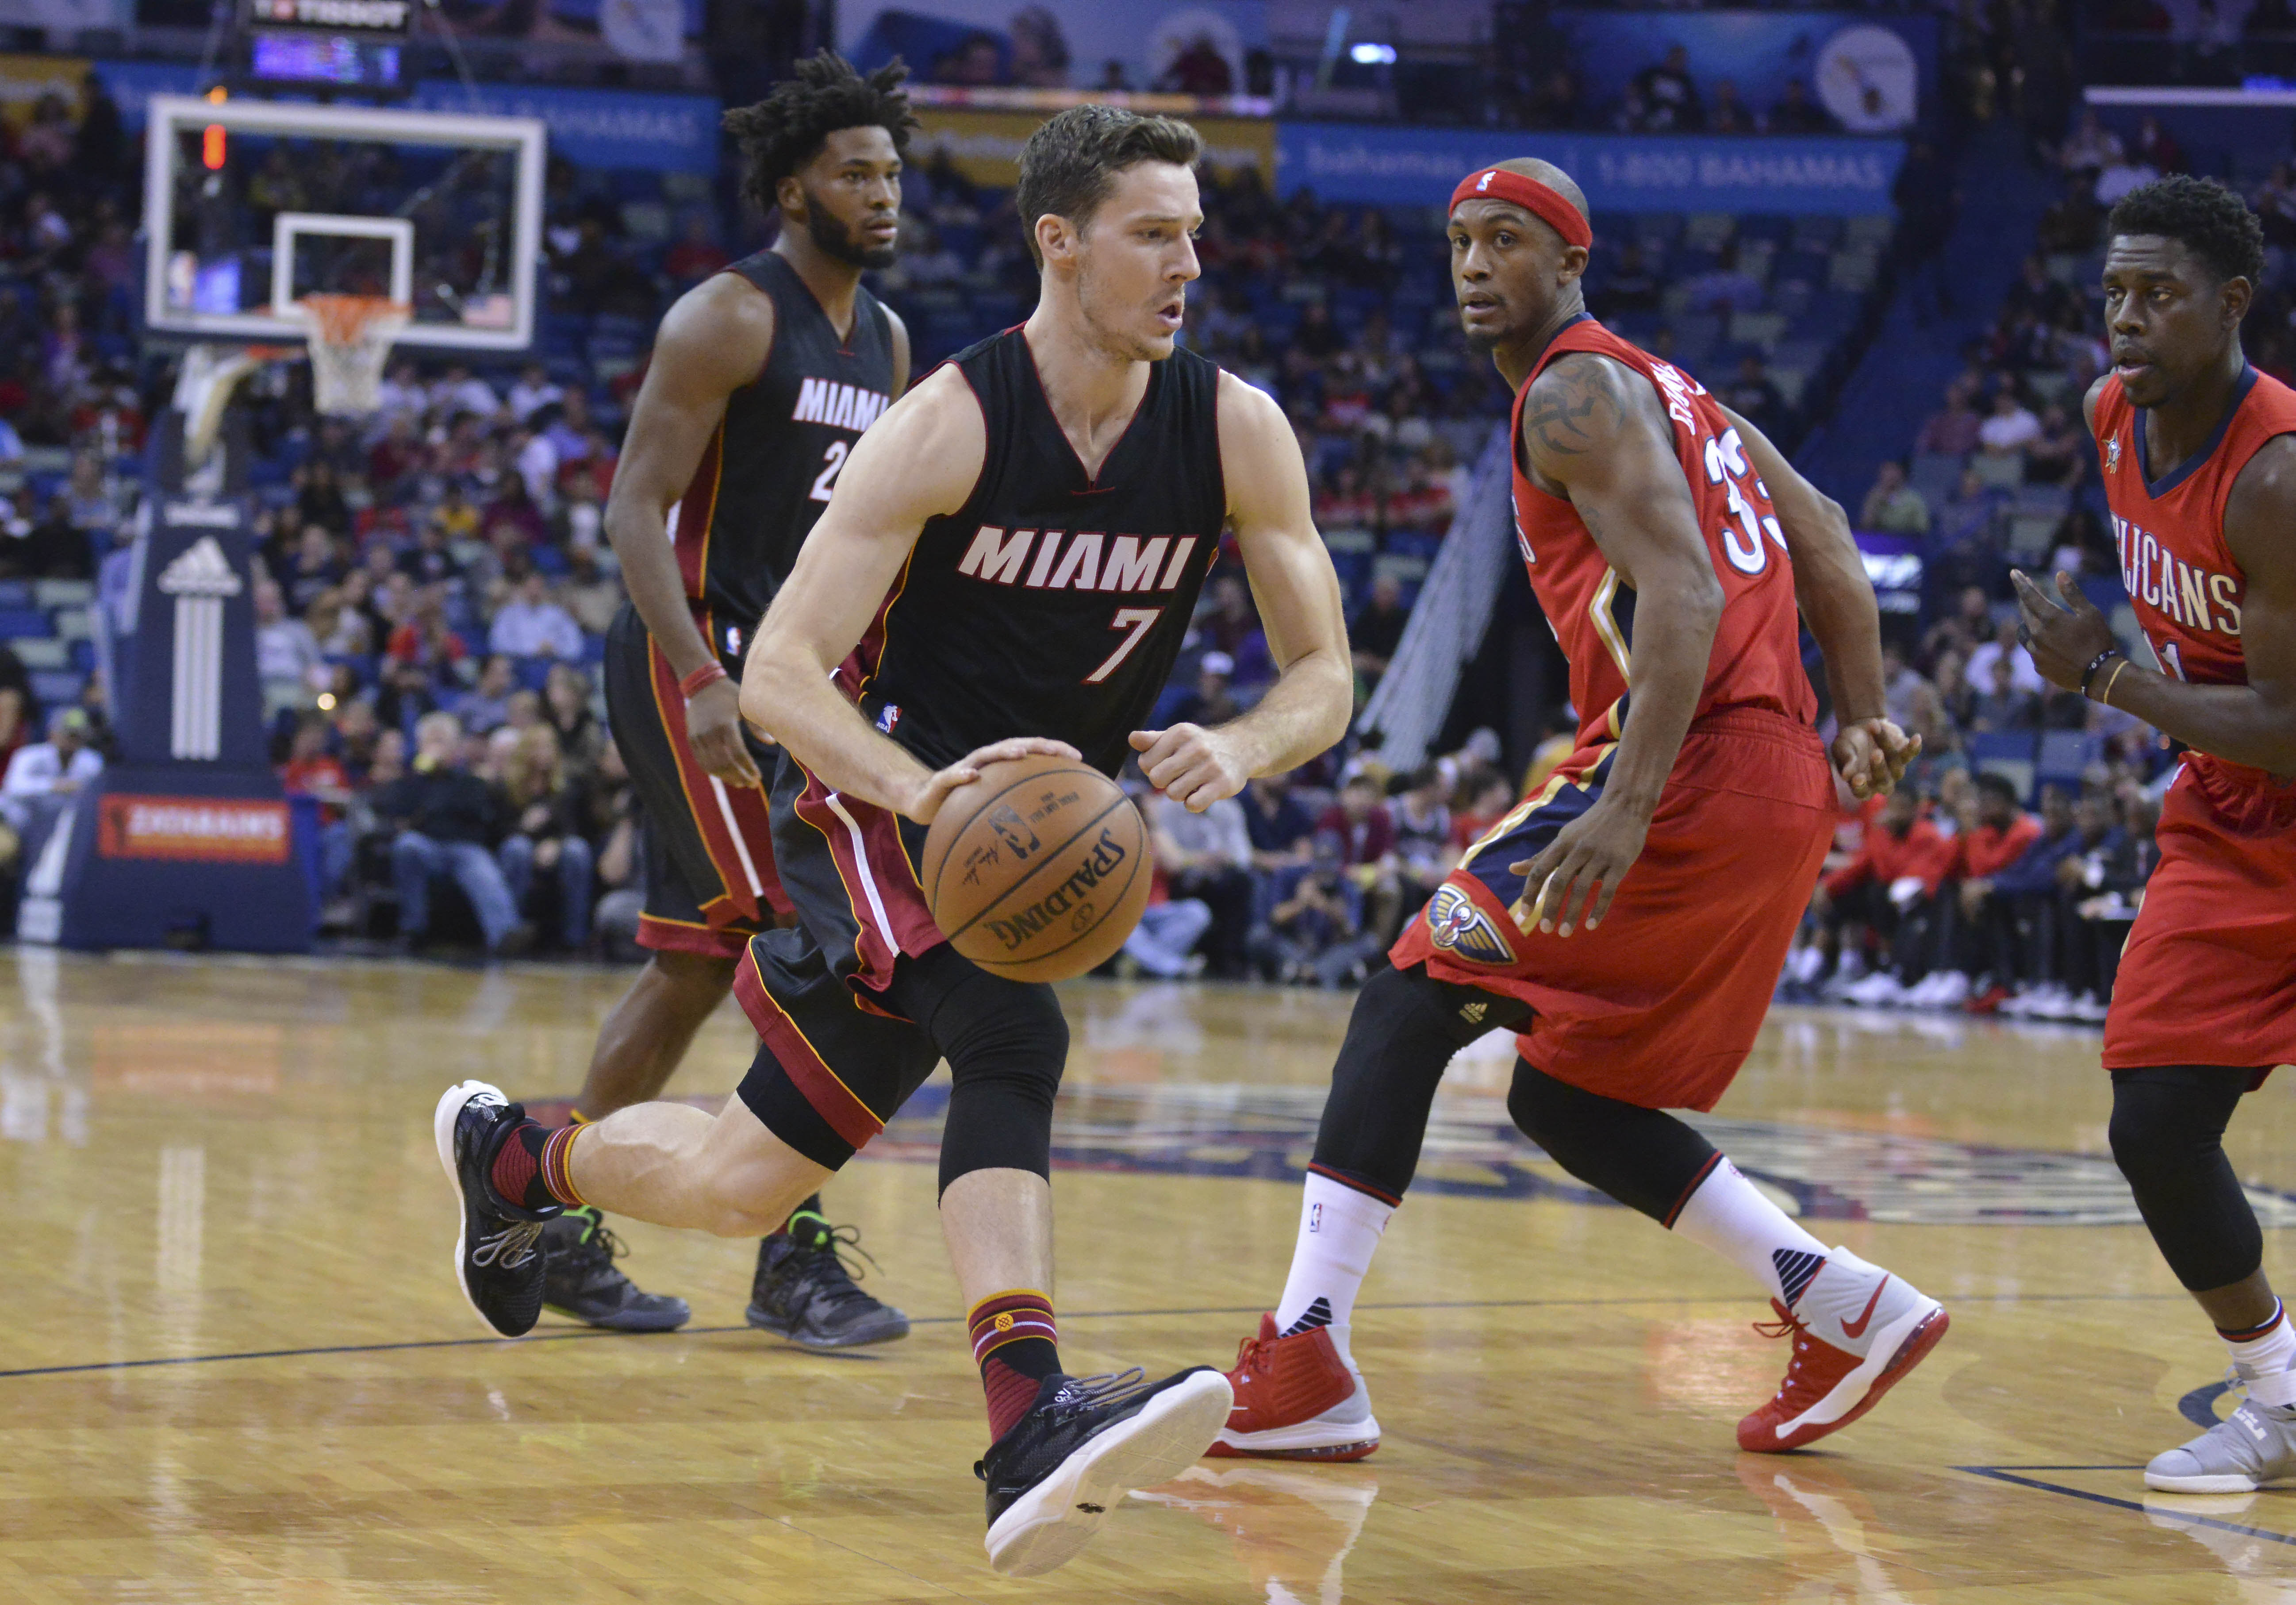 Pelicans at Heat live stream: How to watch online - FanSided